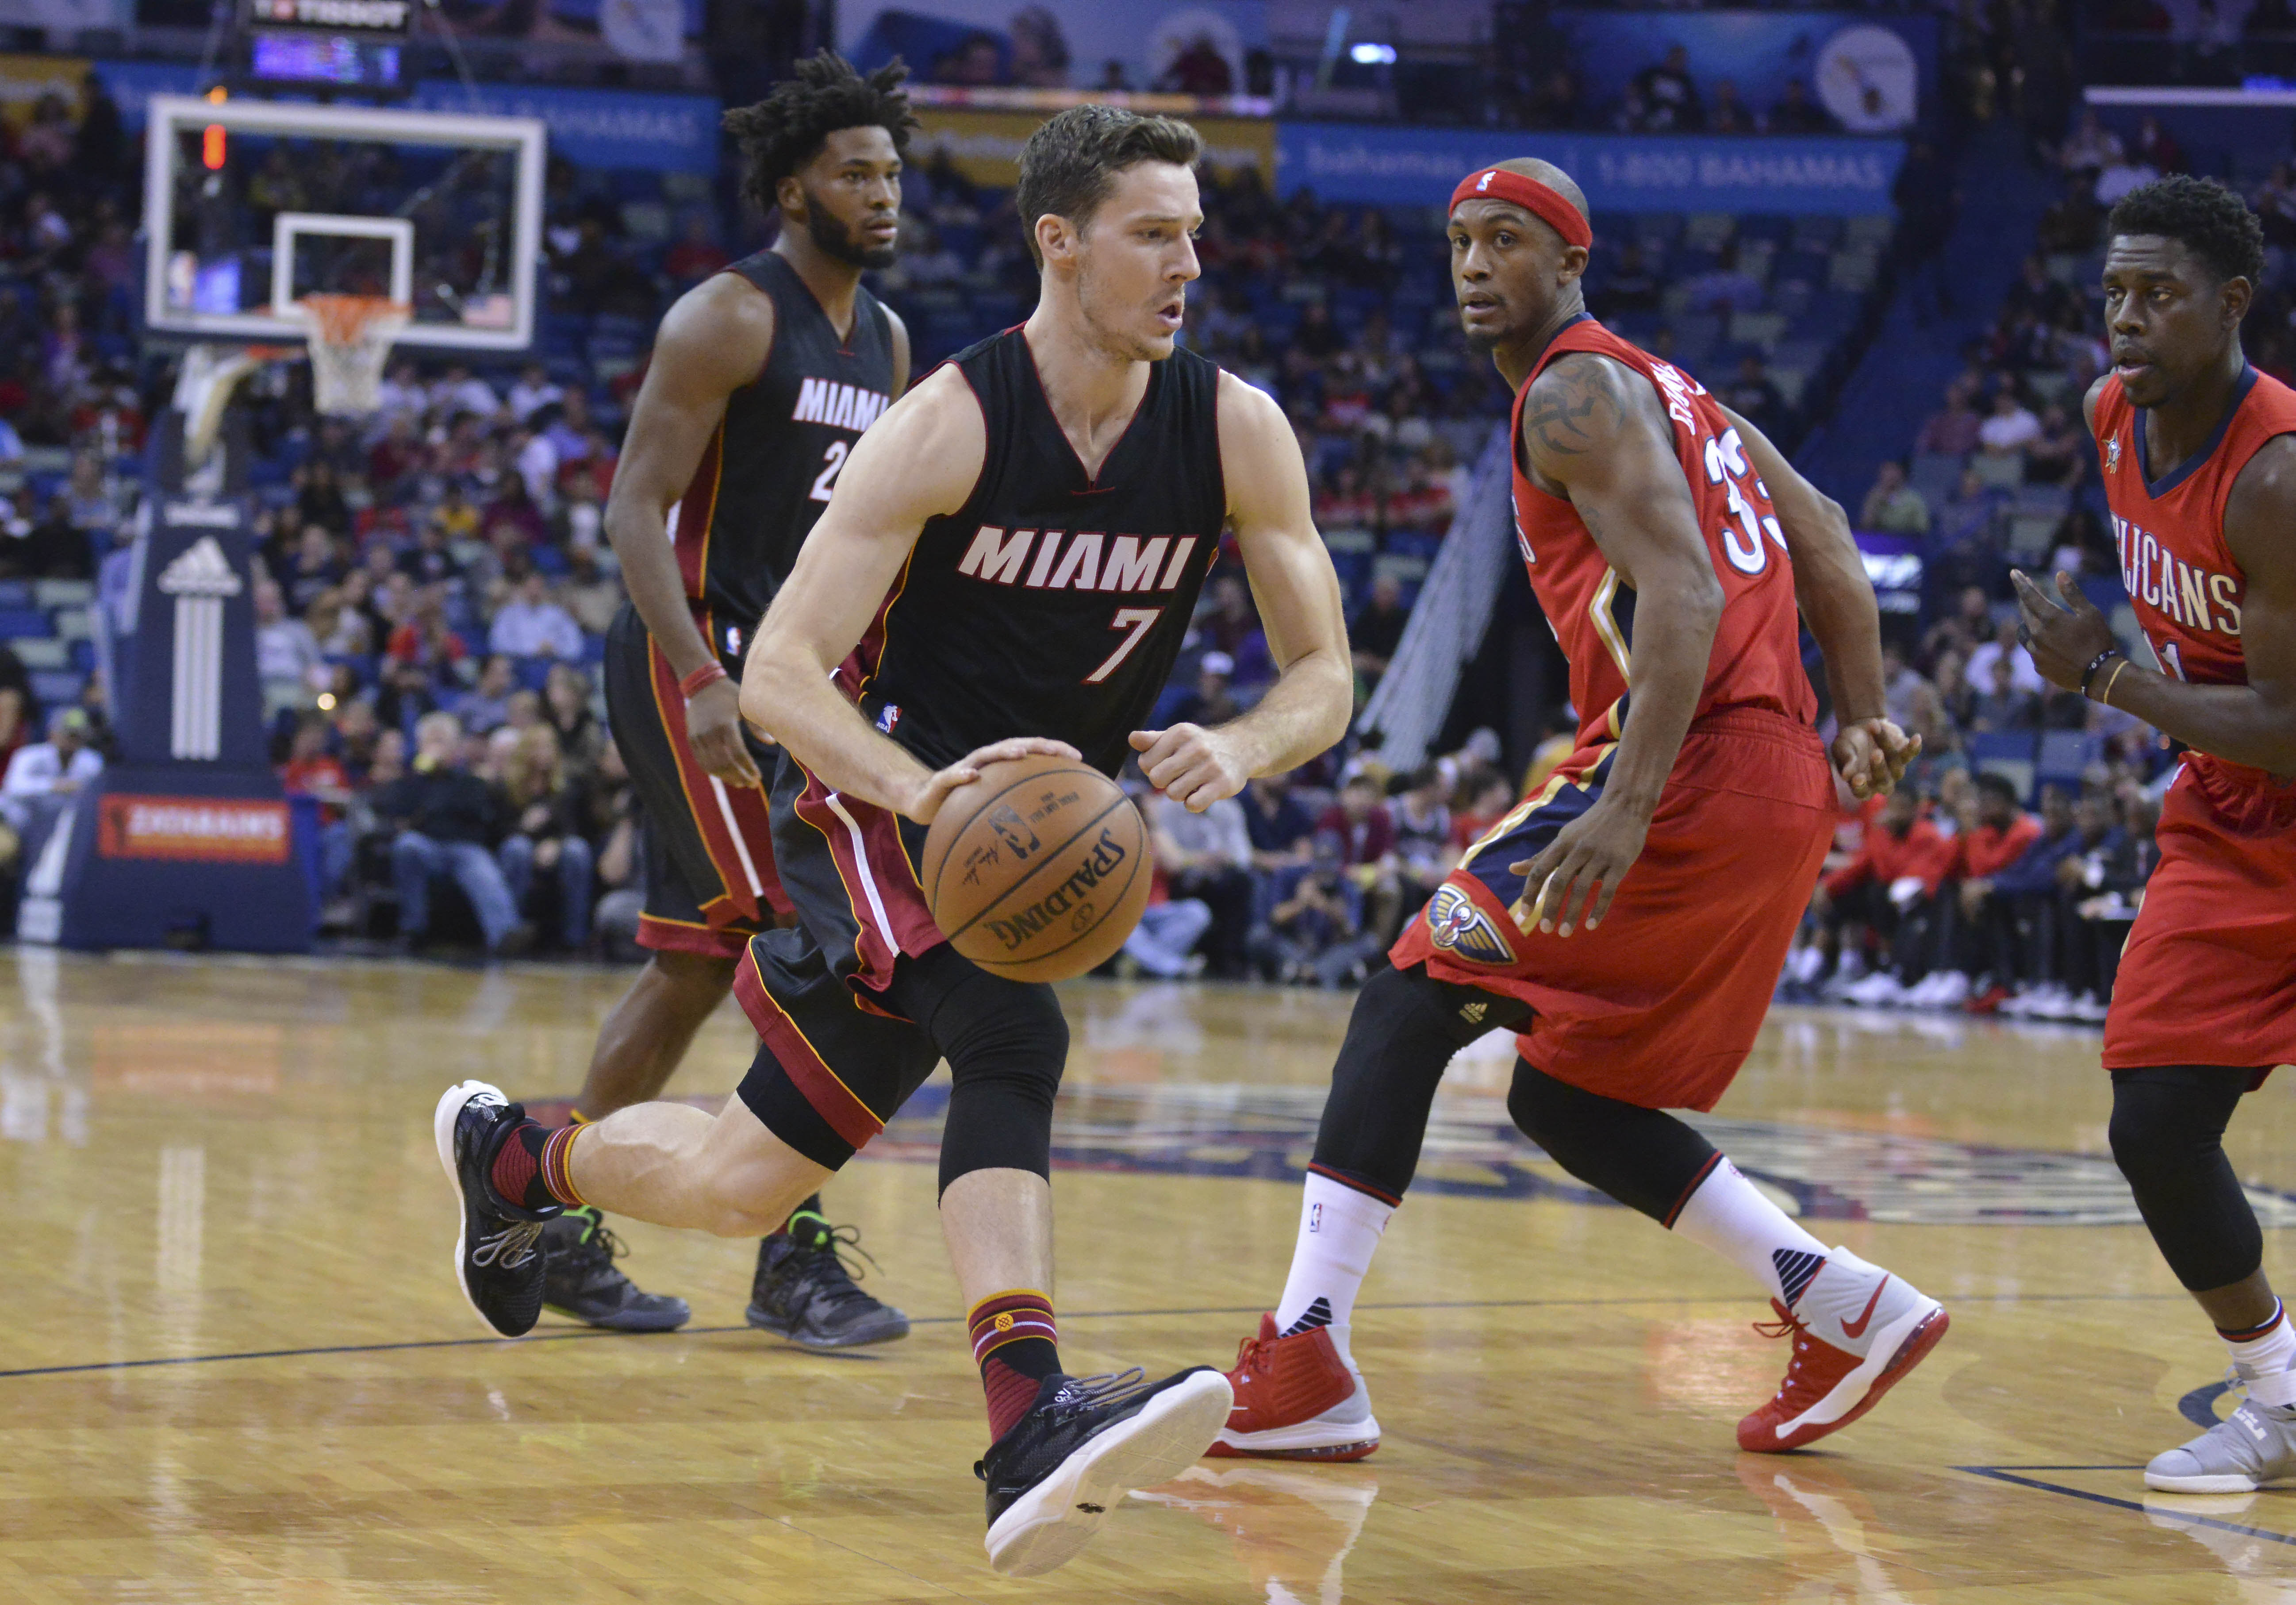 Pelicans at Heat live stream: How to watch online - FanSided